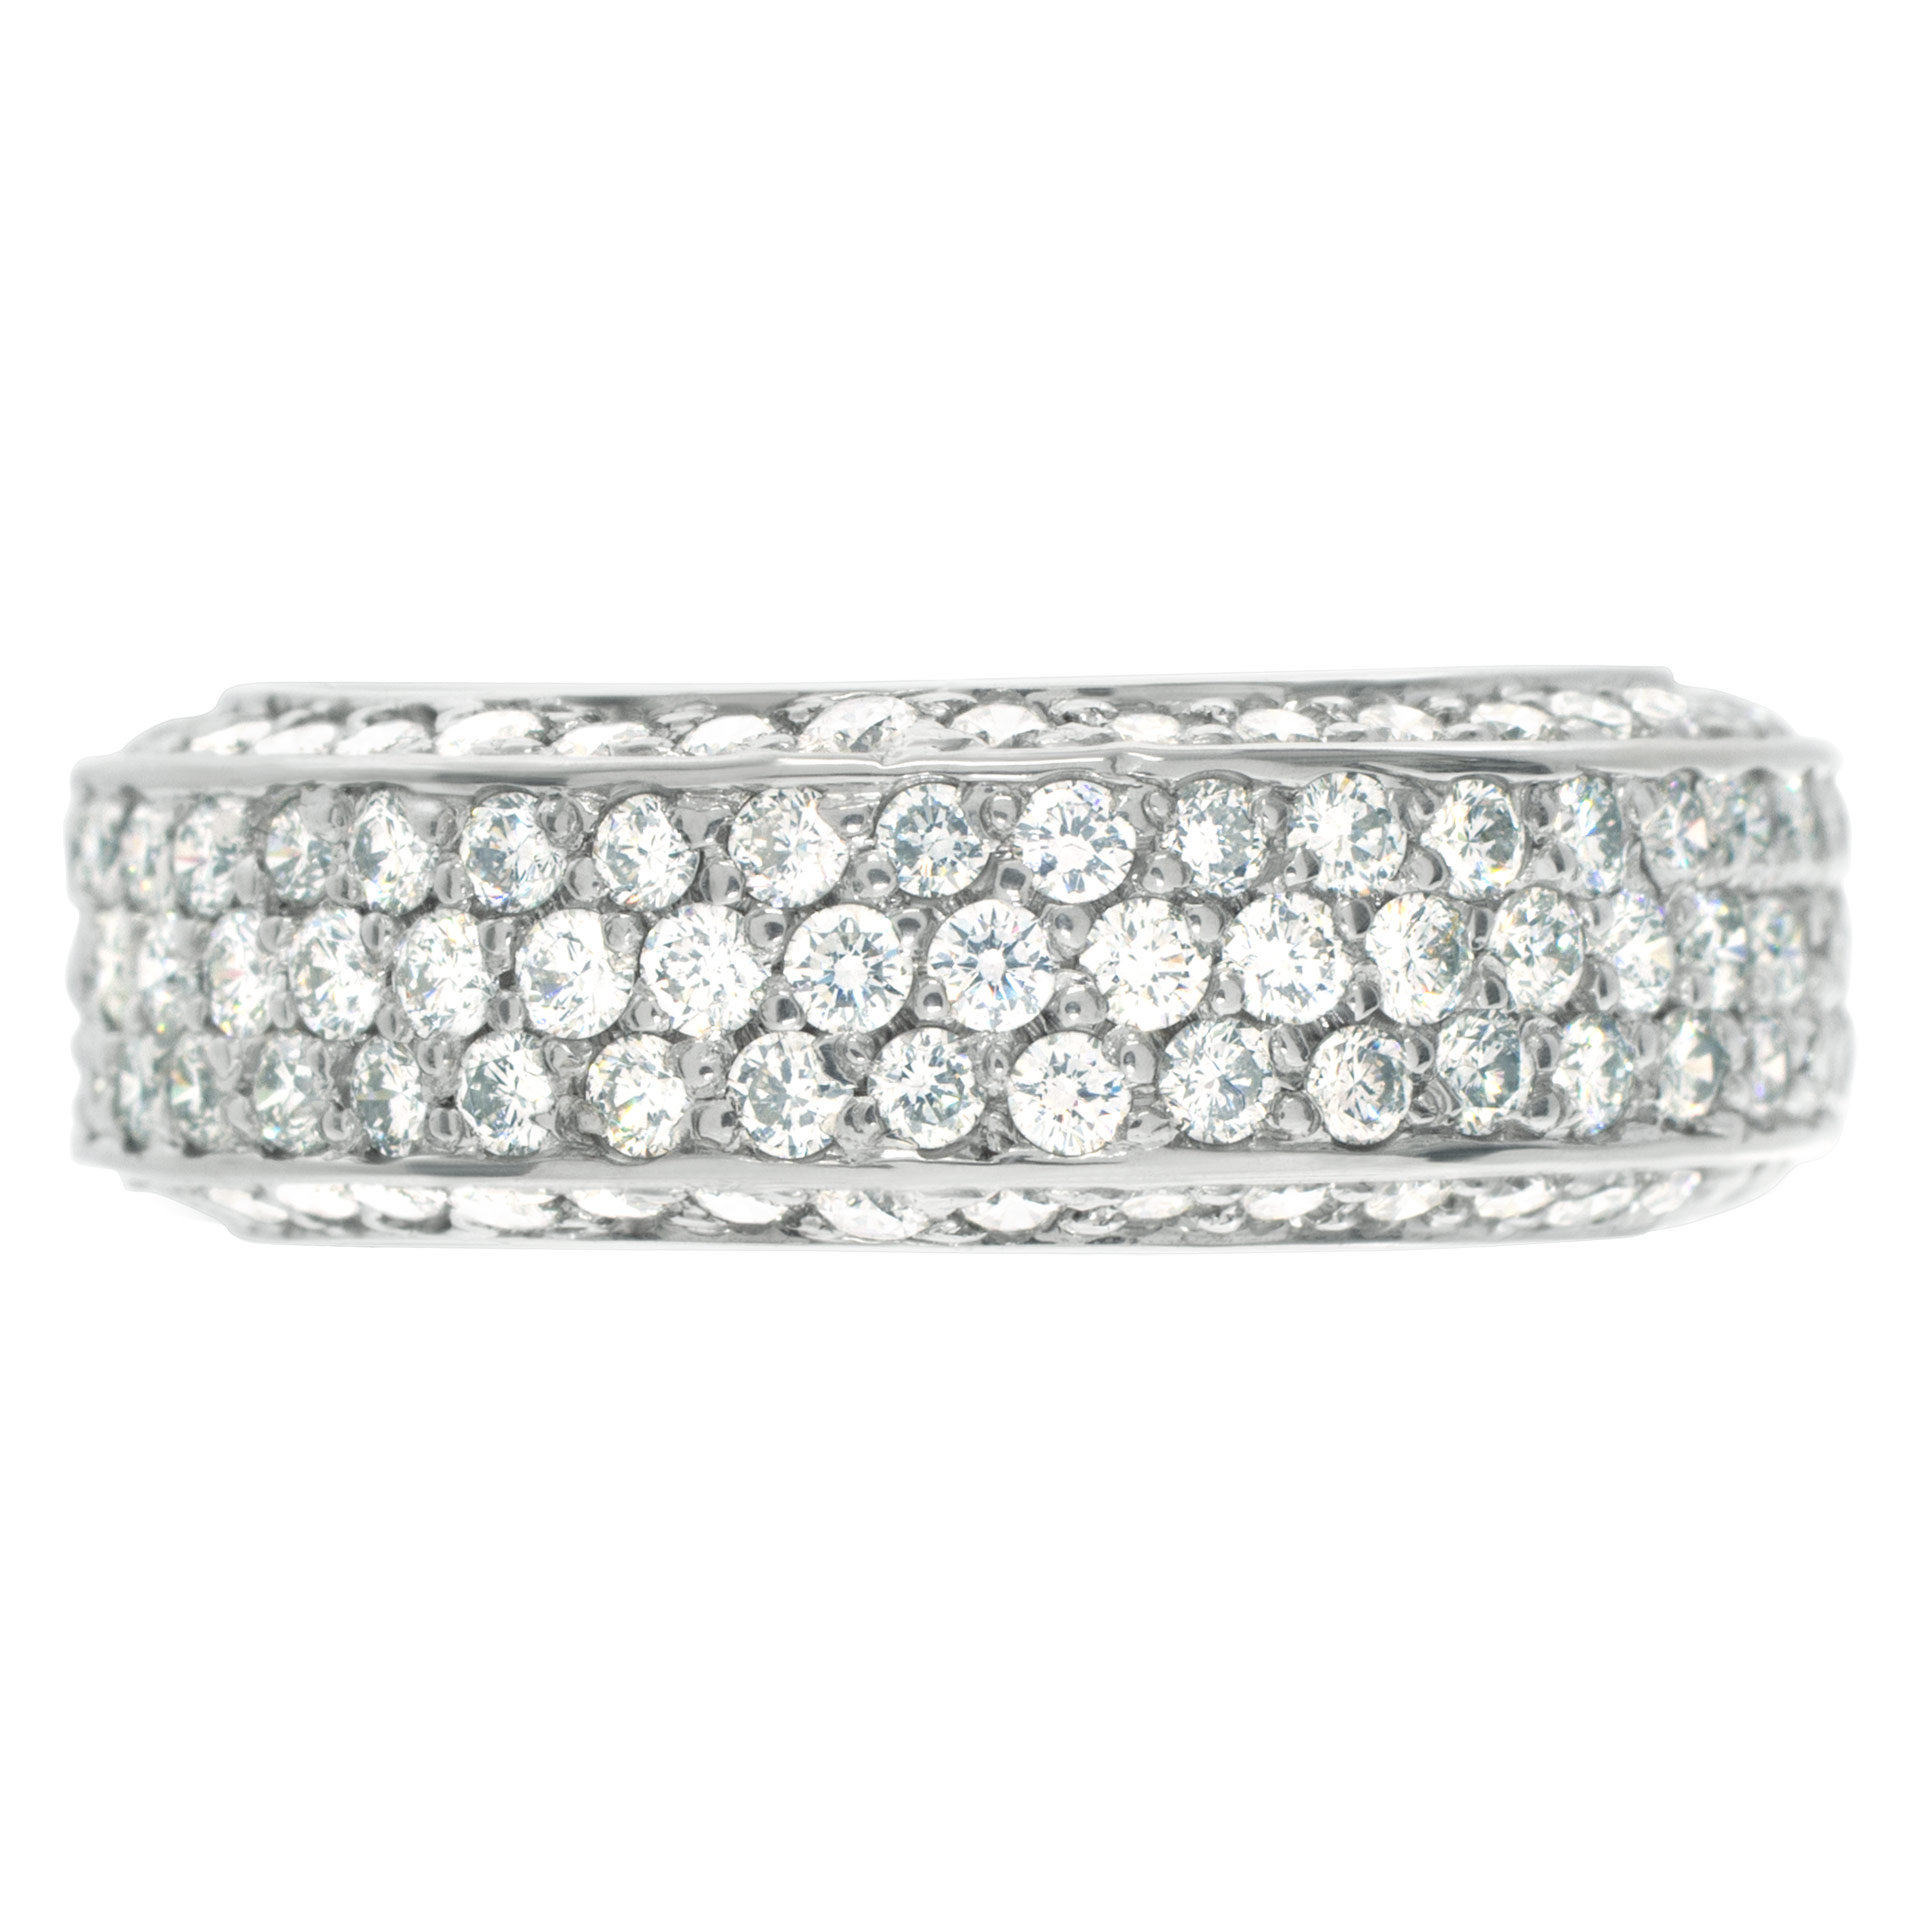 Pave Diamond Eternity Band and Ring with over 1.5 carats Diamonds set in 18K White gold image 1